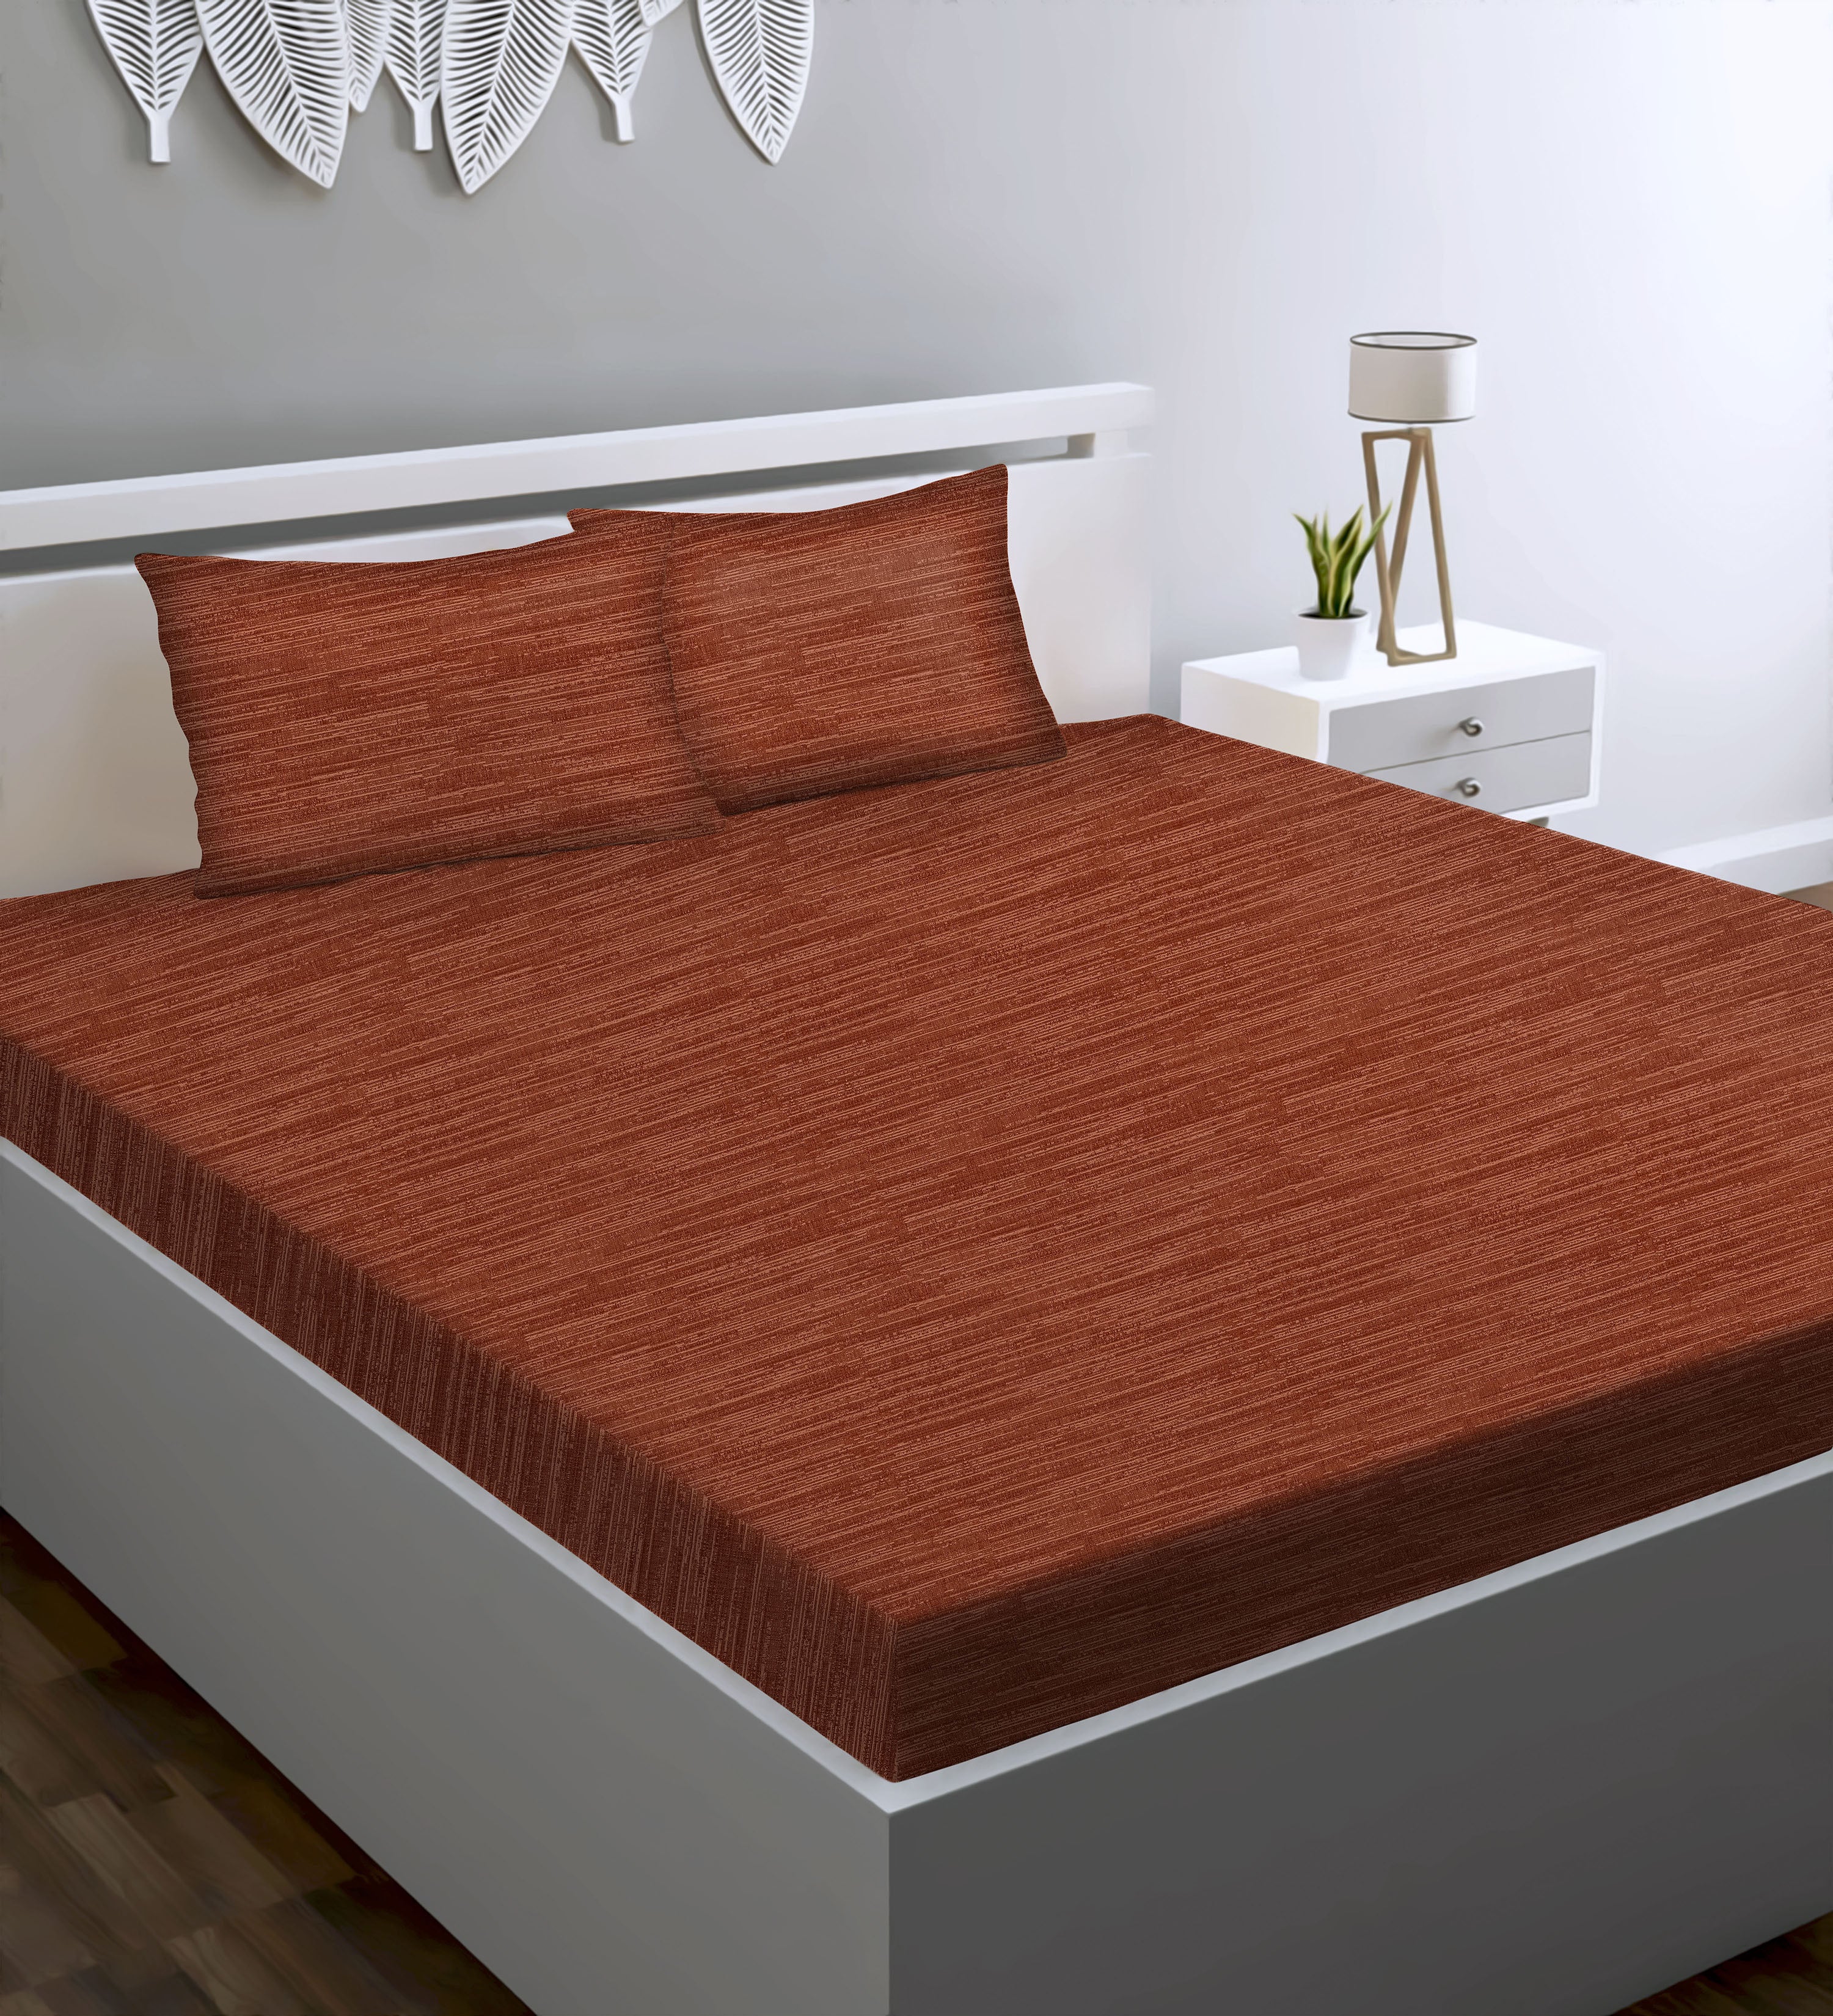 Petra Clay Bedcover for Double Bed with 2 PillowCovers King Size (104" X 90")